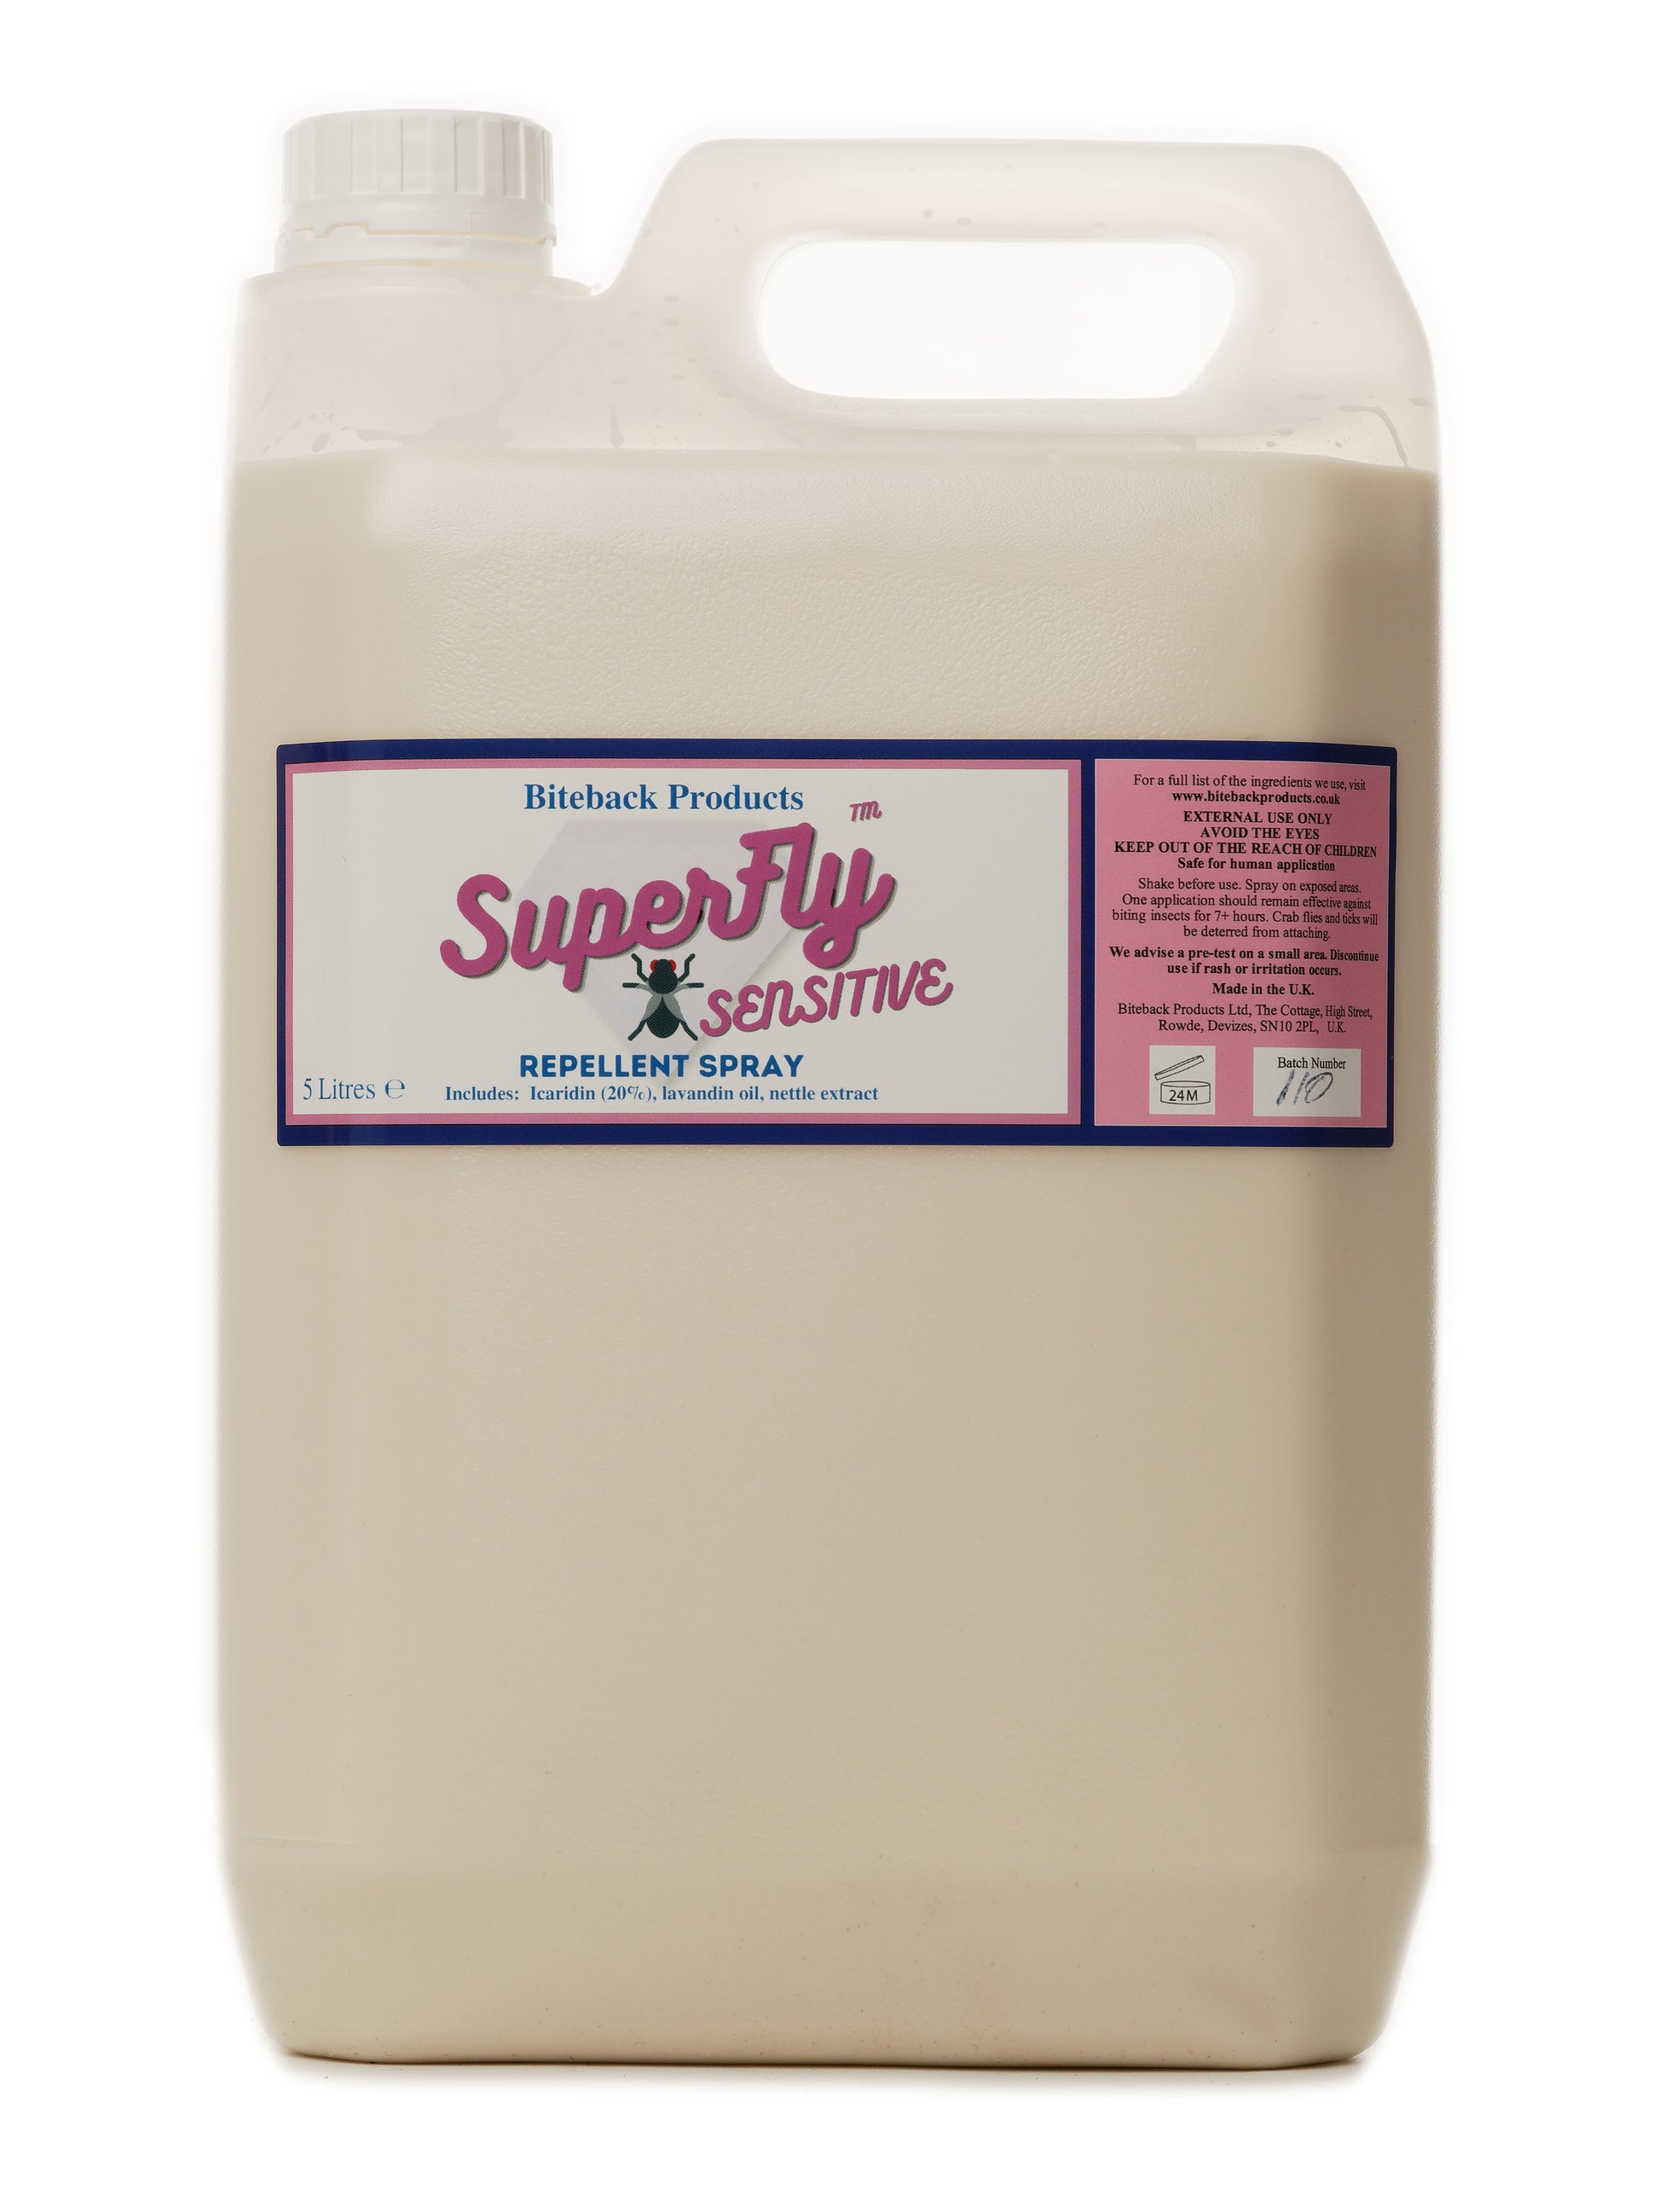 A refill container of SuperFly Sensitive, an insect repellent spray for sensitive horses